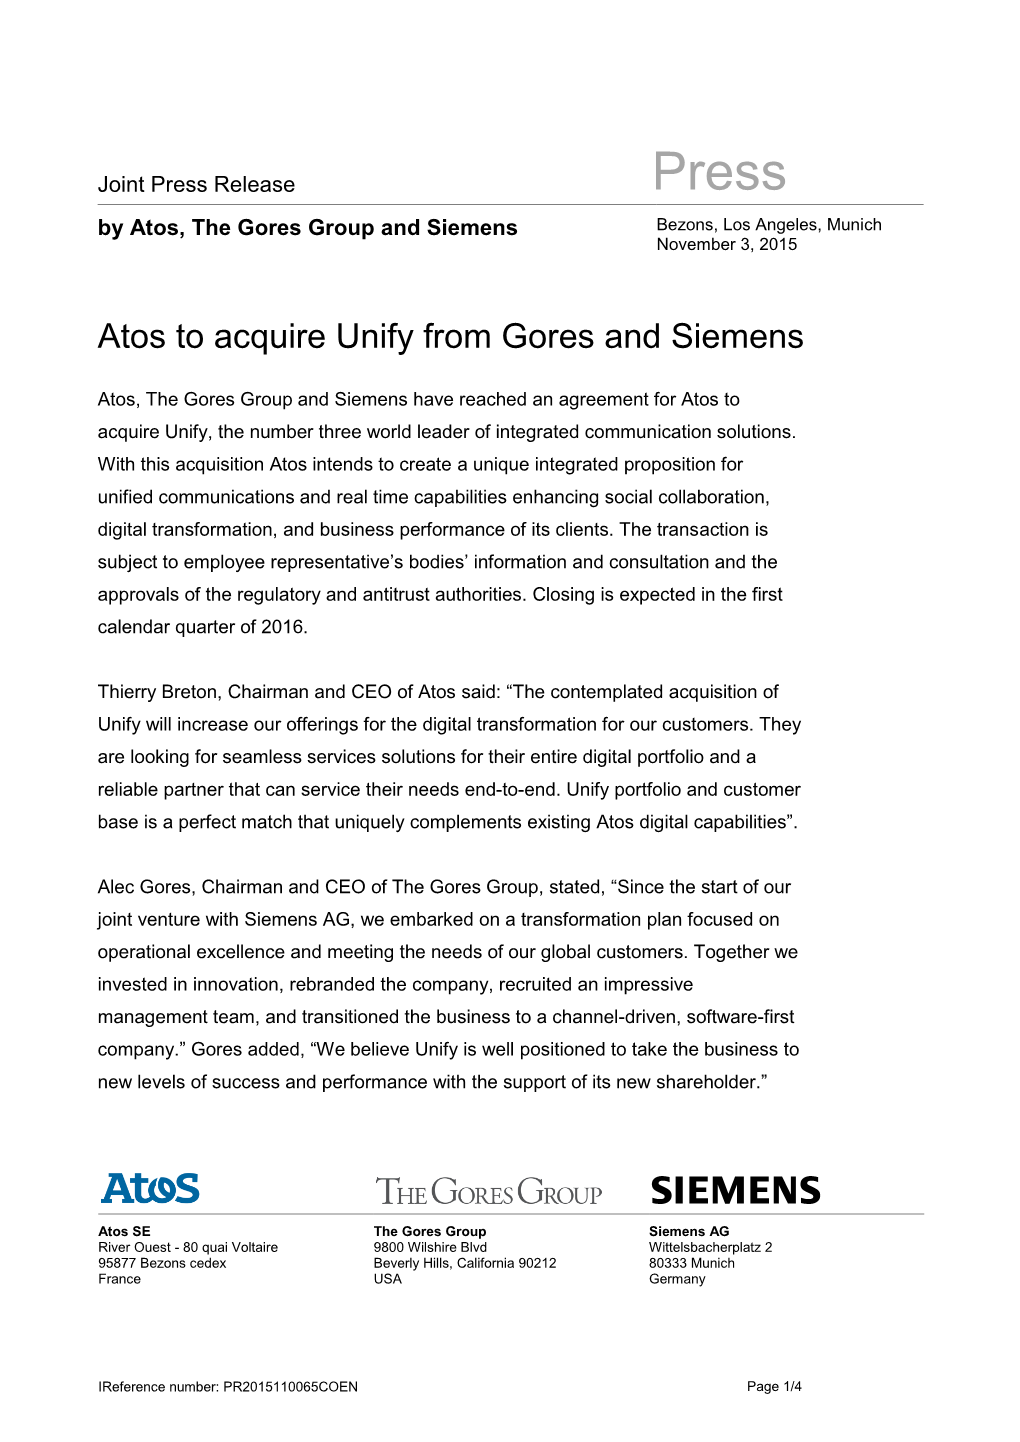 Atos to Acquire Unify from Gores and Siemens